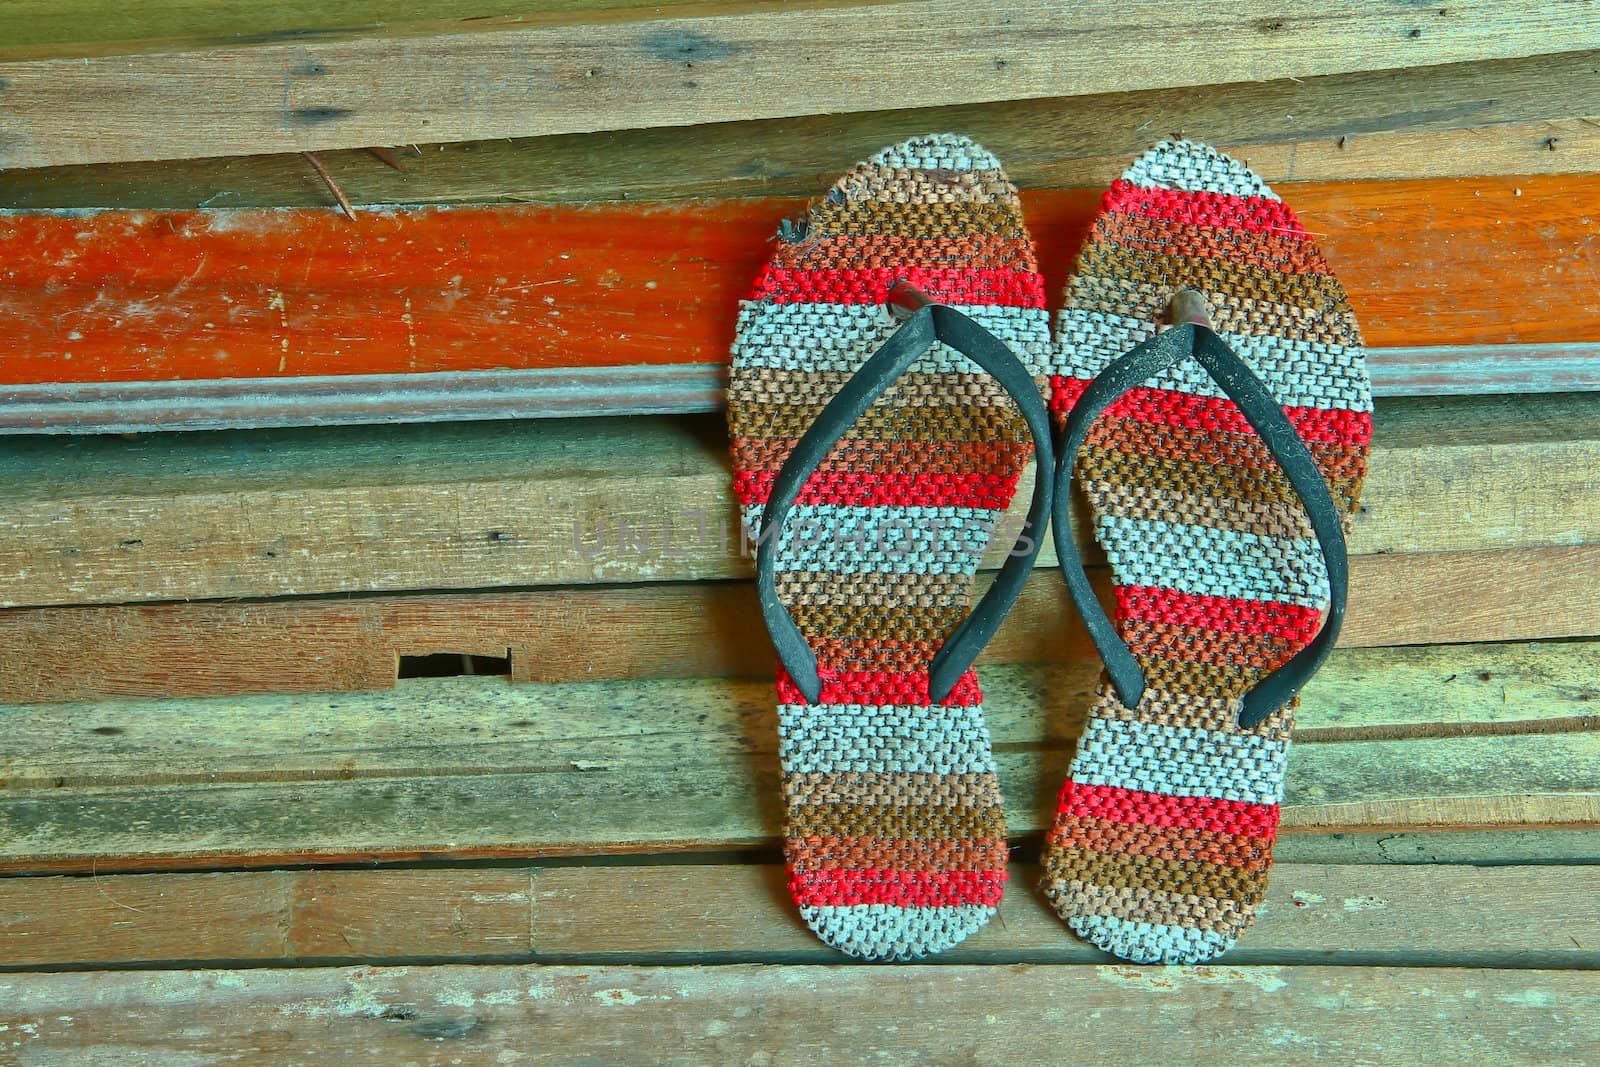 Flipflop shoes by Photoguide